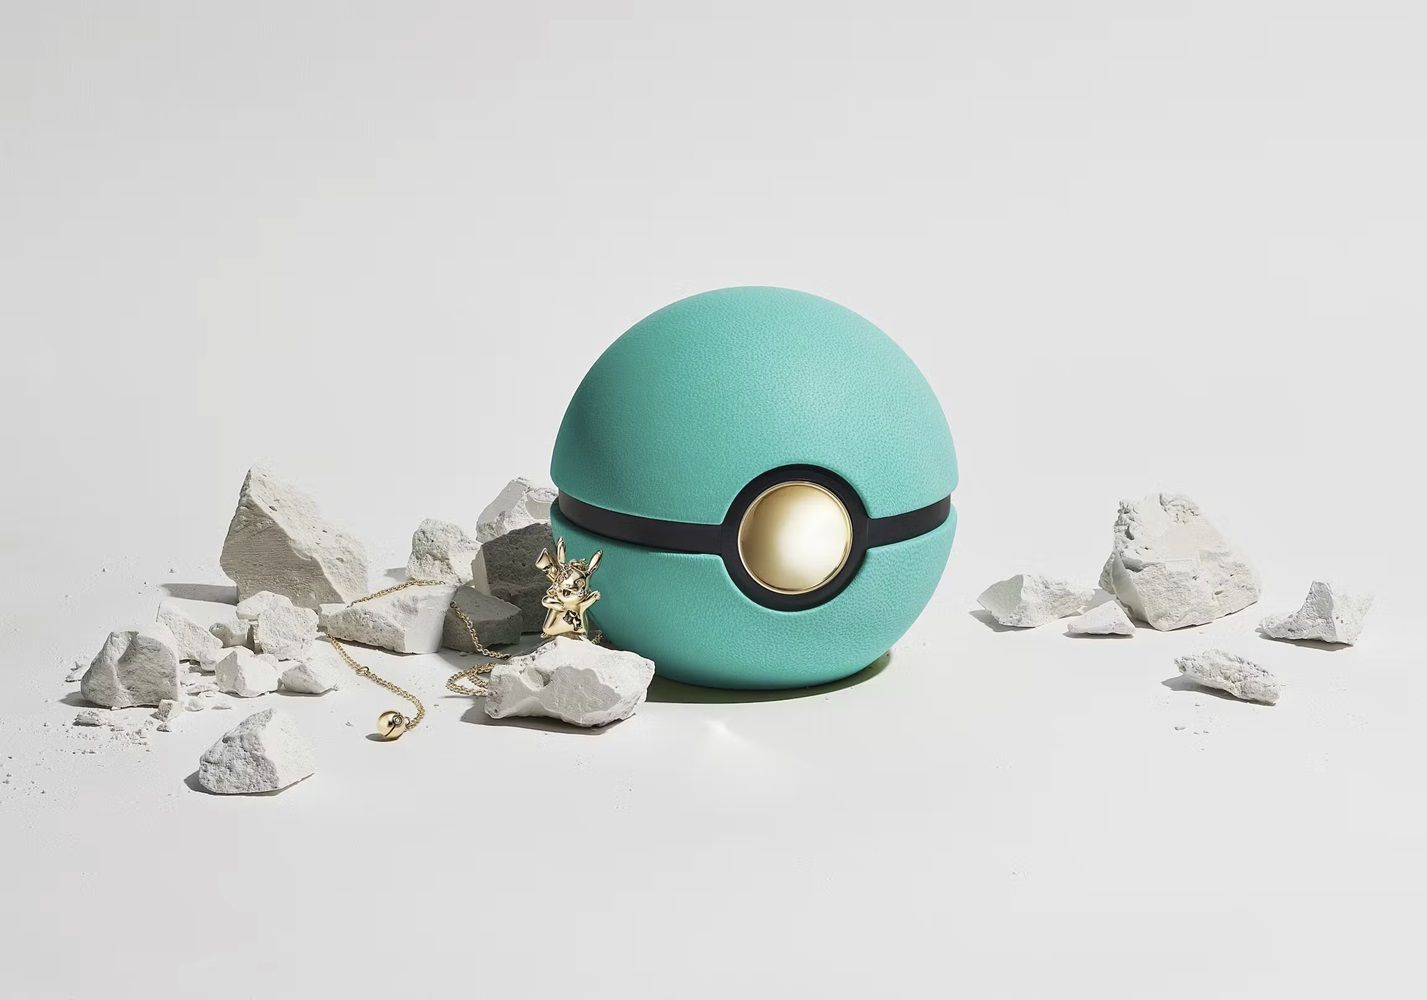 Pokémon Releases Jewelry in Collaboration With Daniel Arsham and 